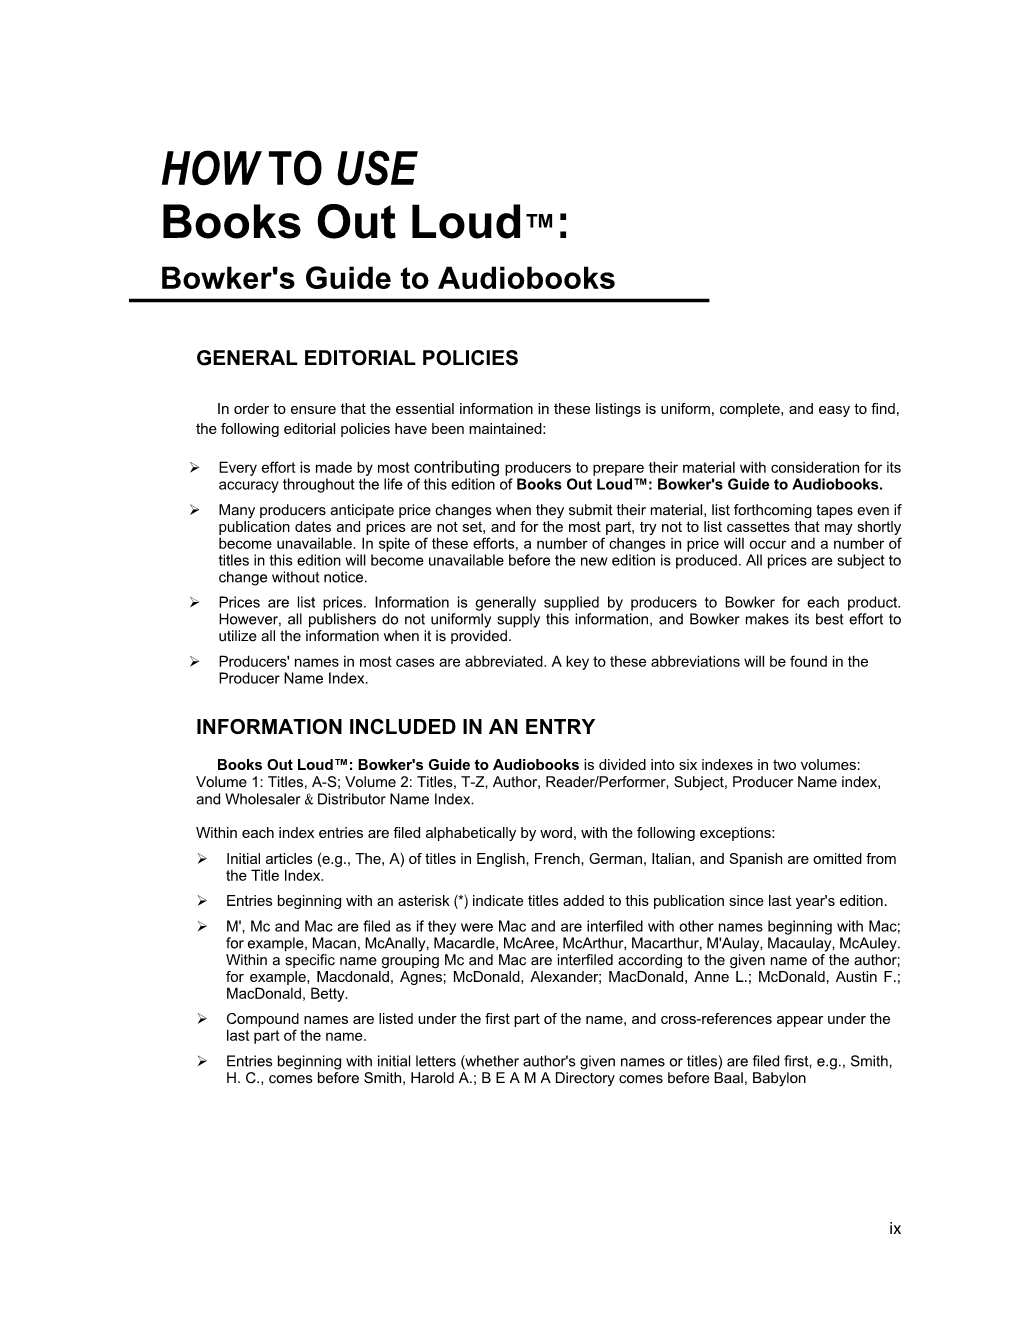 HOW to USE Books out Loud™: Bowker's Guide to Audiobooks